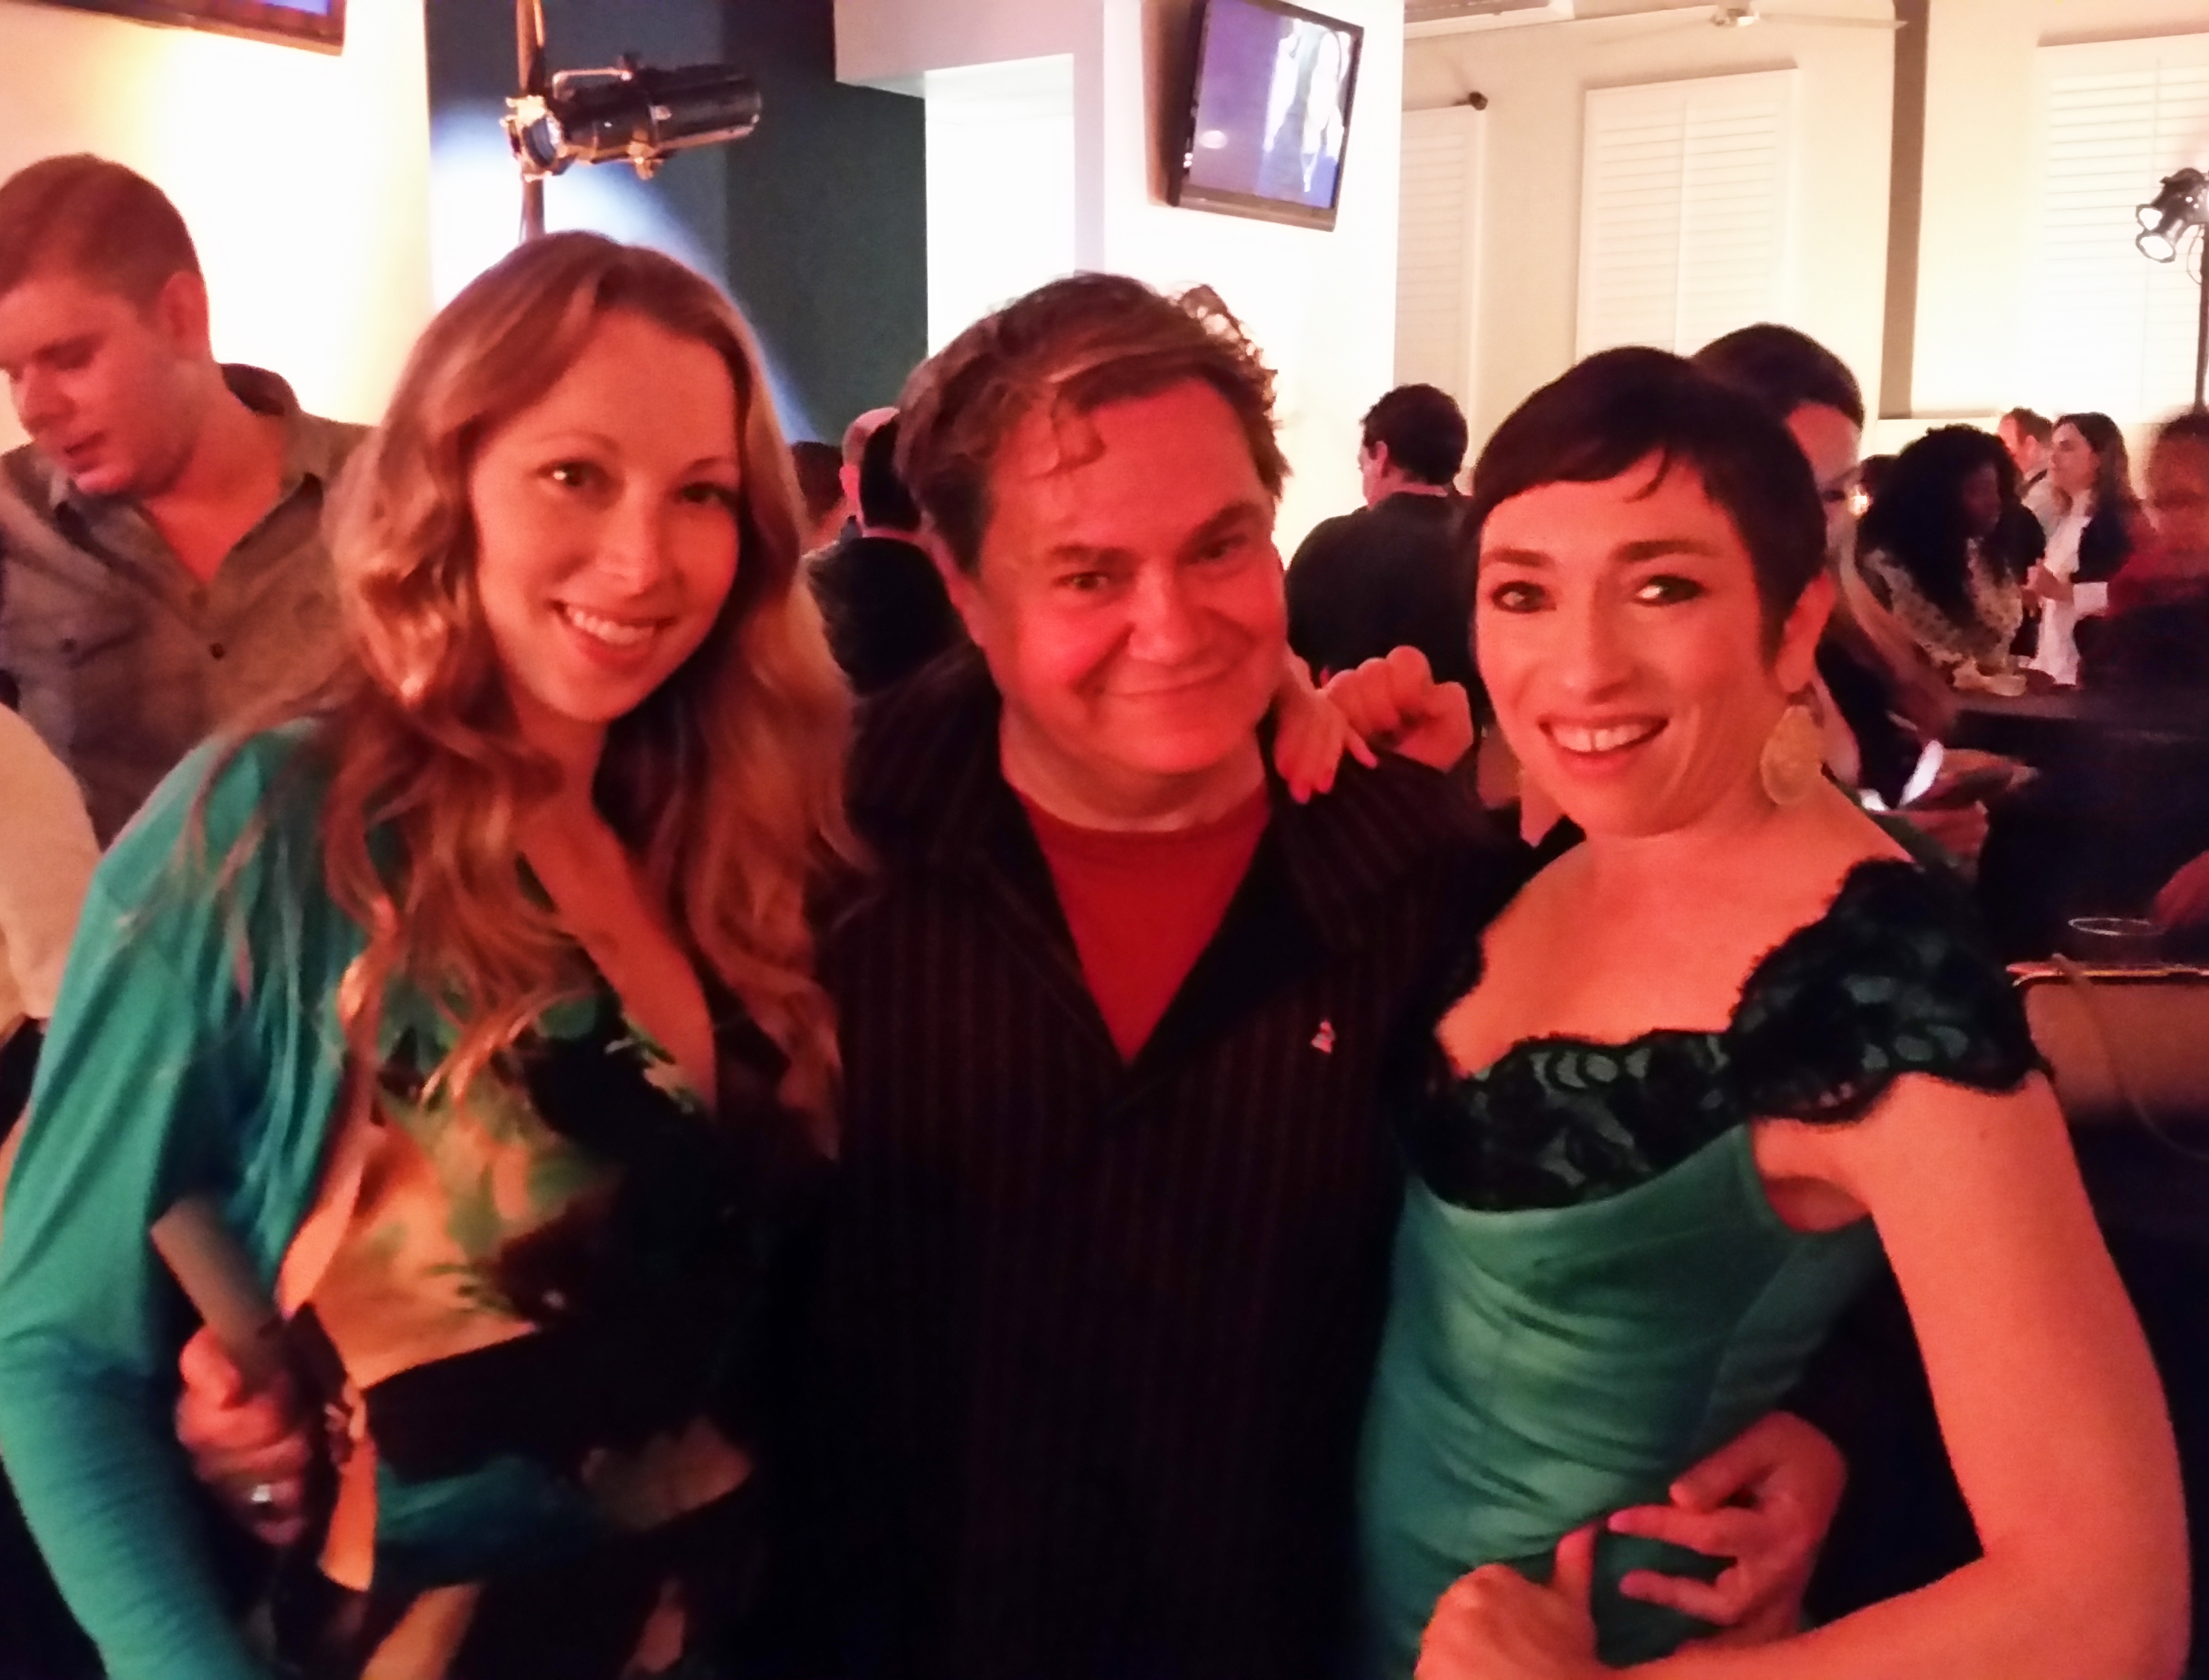 Jennifer Day (Hot Package), Pierre Patrick (Producer of Jennifer Day TV), and Naomi Grossman (American Horror Story) at Emmy event